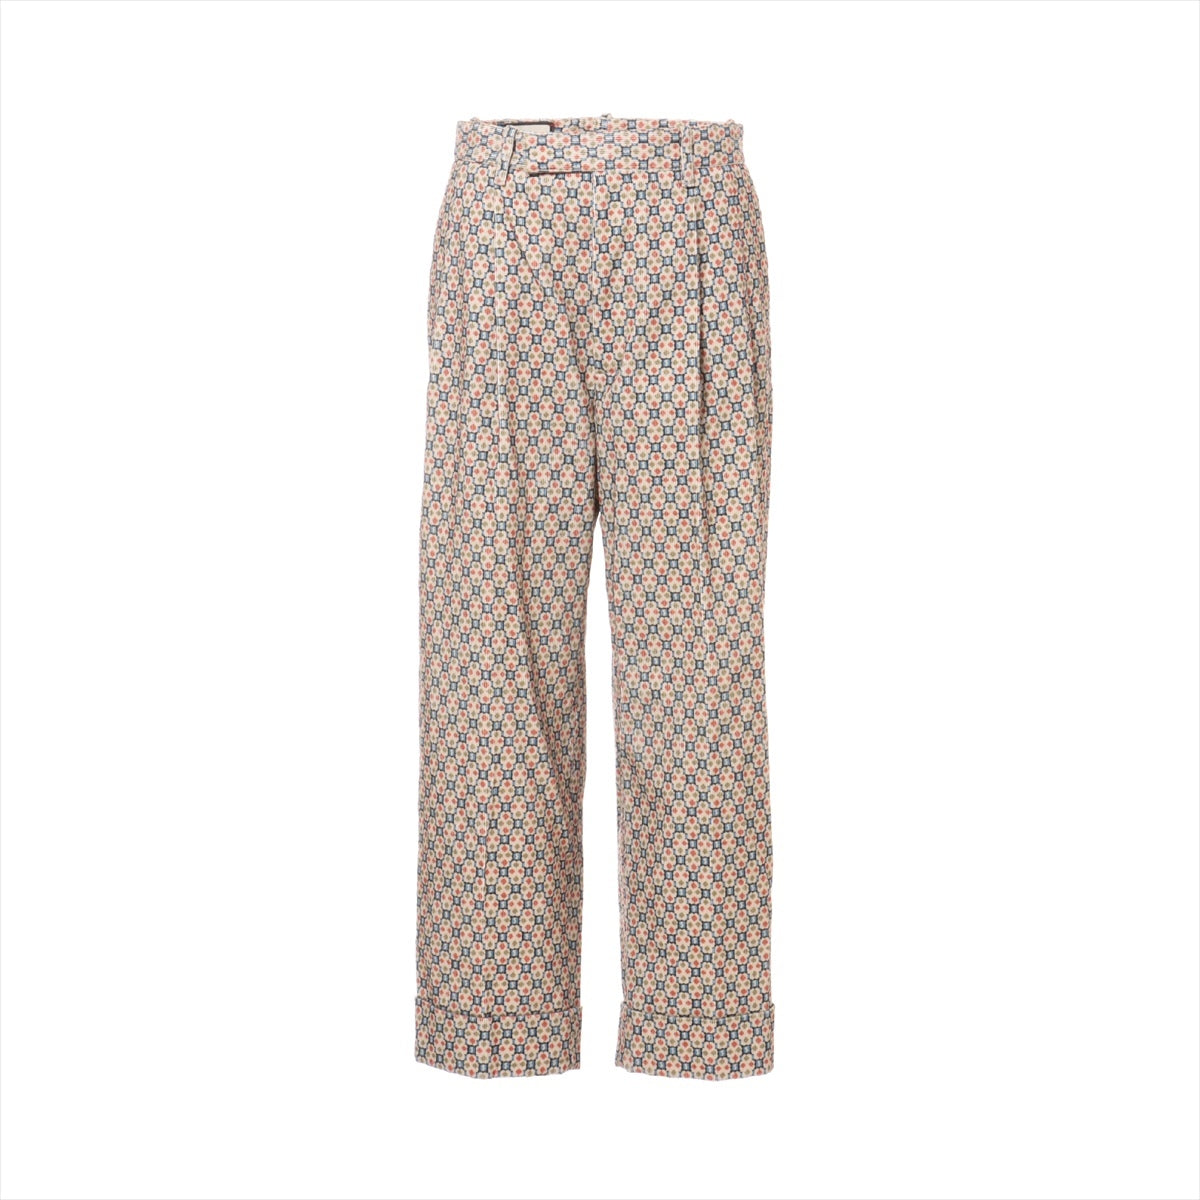 Gucci 17 years Cotton & rayon Pants 42 Ladies' Multicolor  479988 Total handle